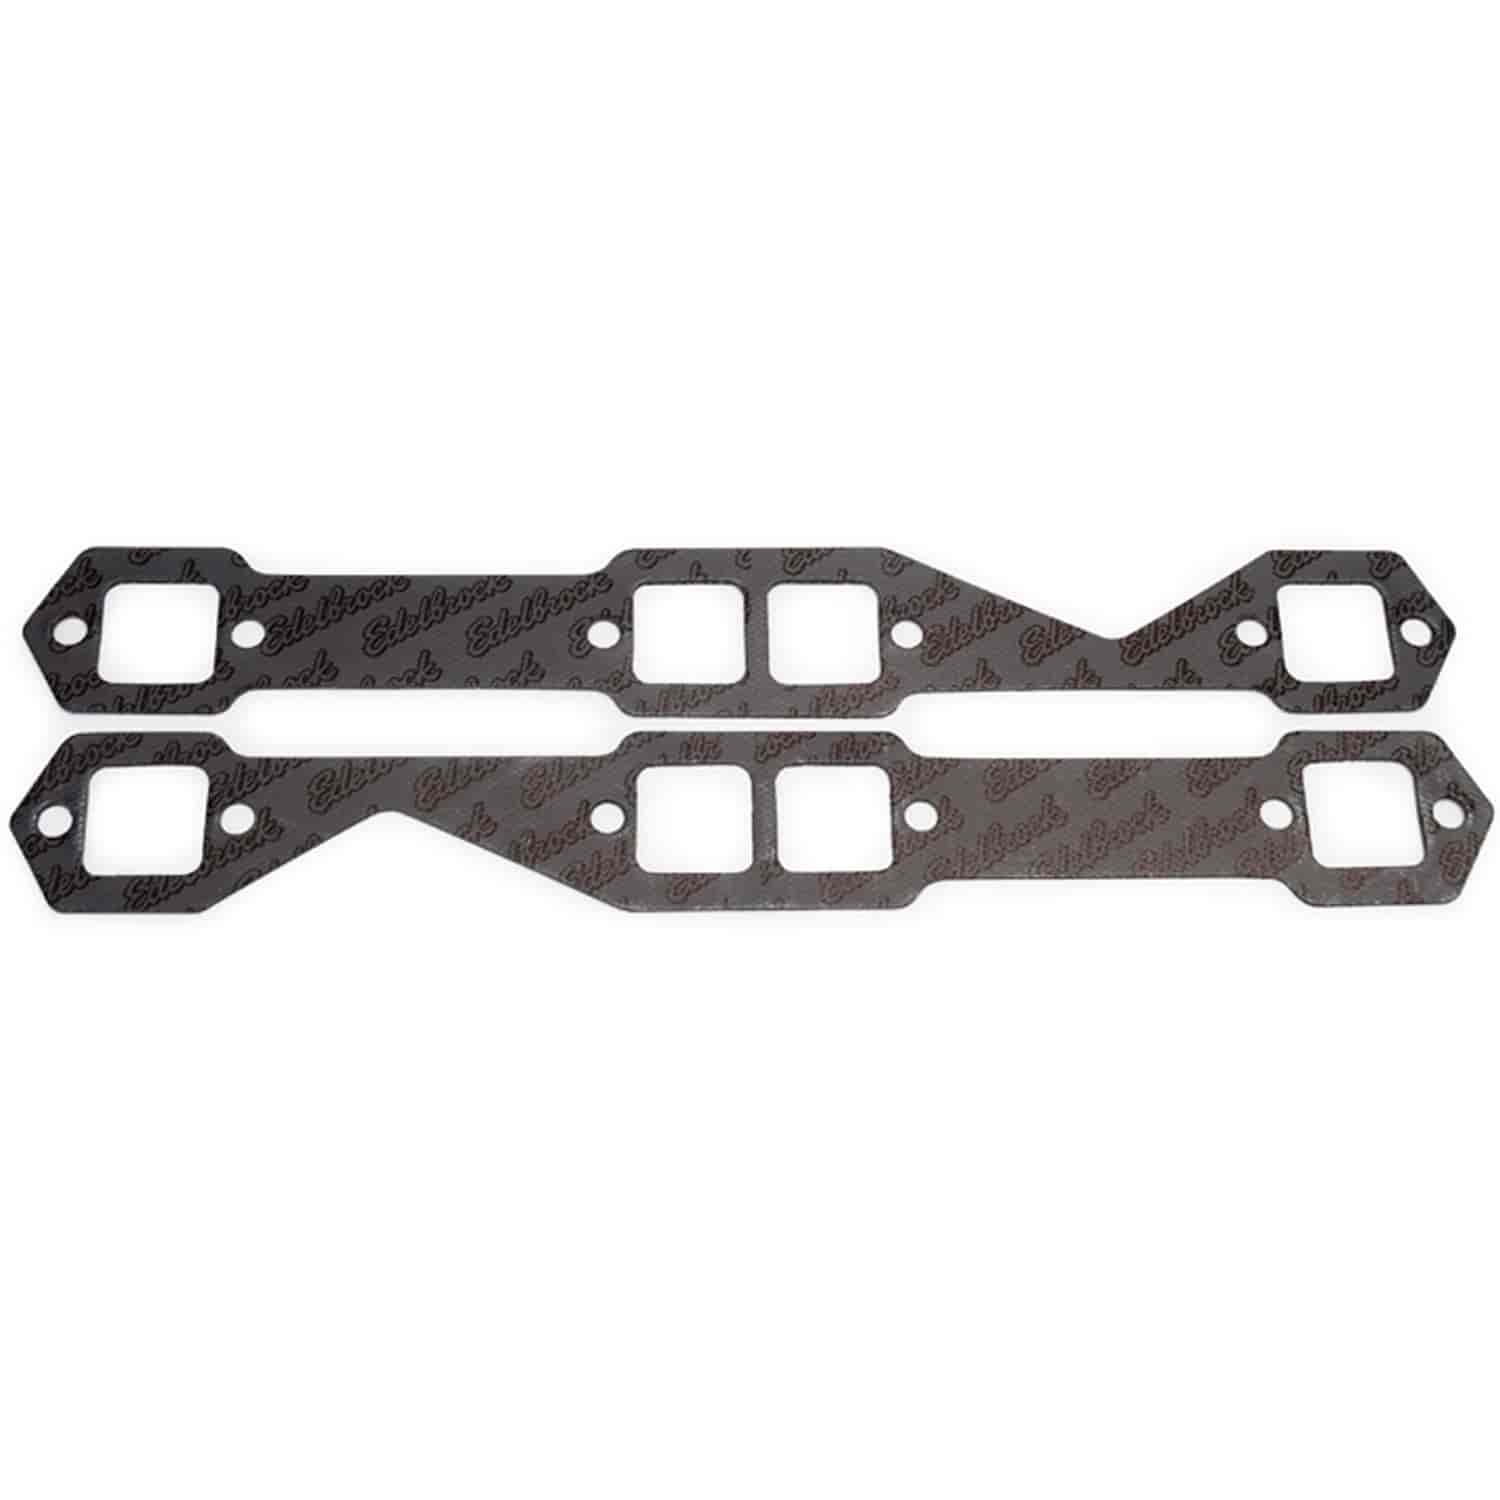 Exhaust Gaskets for Small Block Chevy